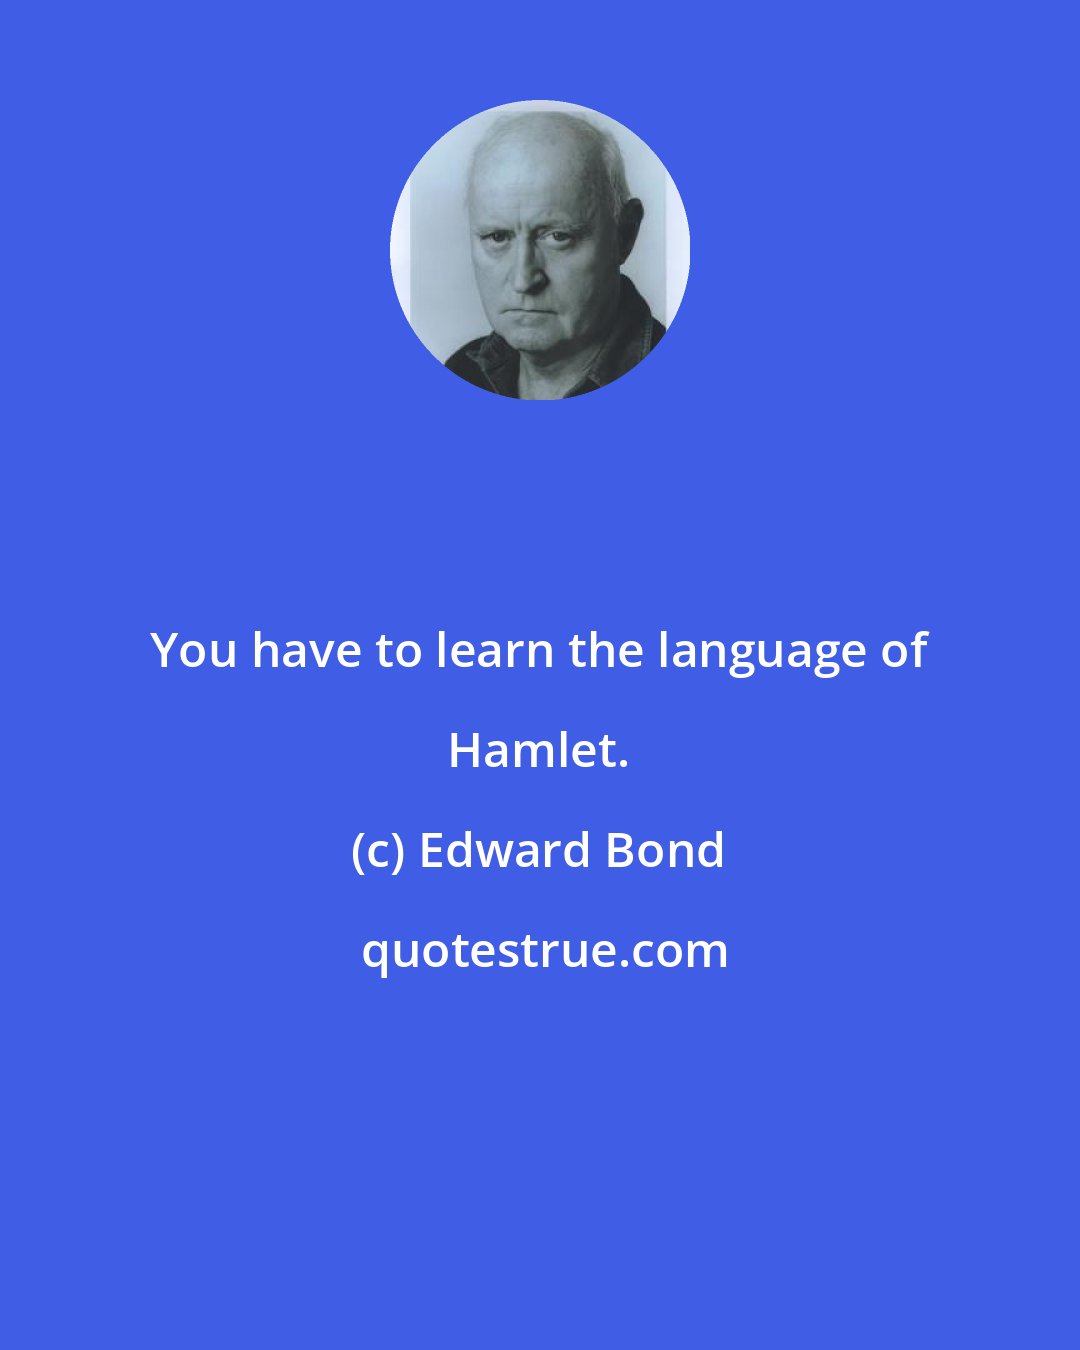 Edward Bond: You have to learn the language of Hamlet.